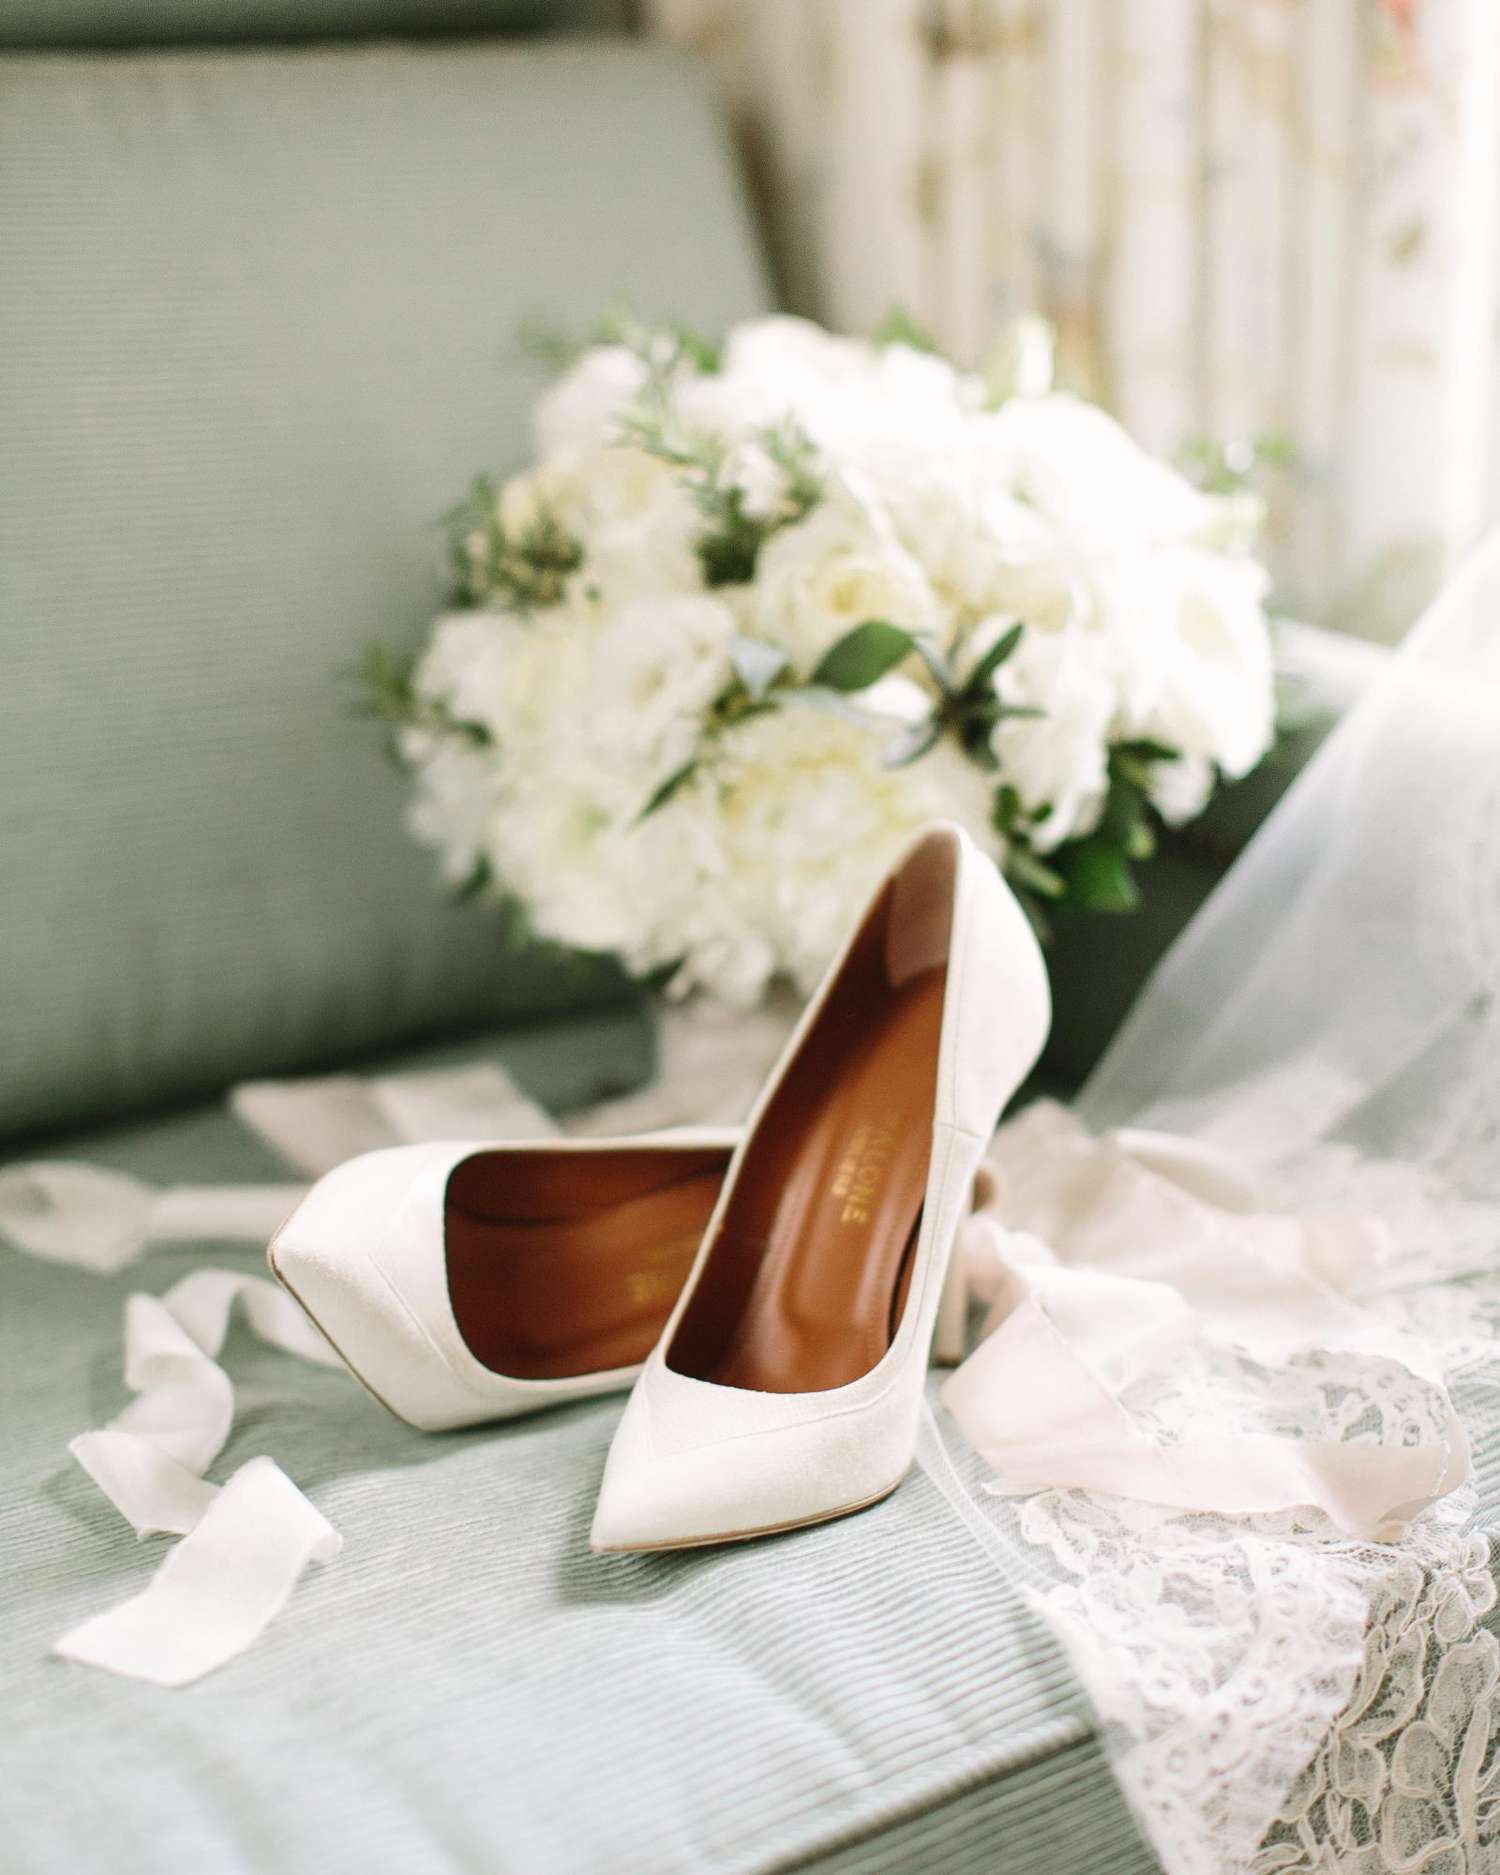 mallory-diego-wedding-shoes-003-s112628.jpg